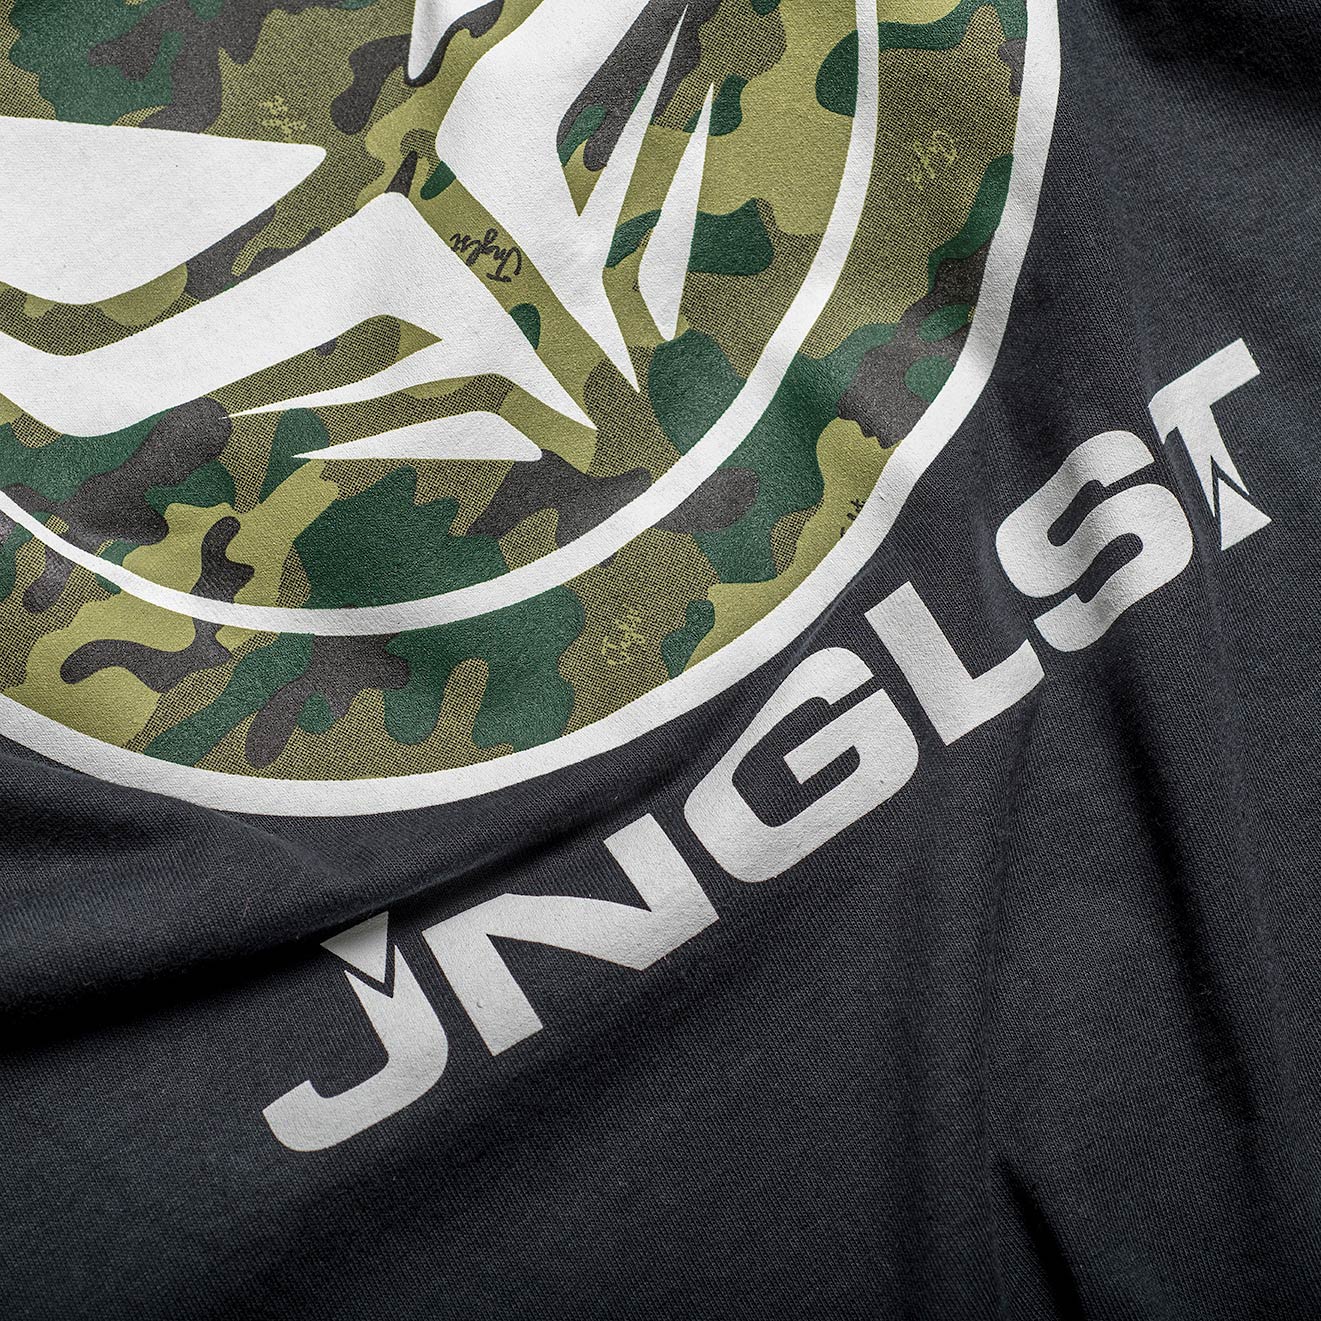 Jnglst Clothing and Dread Recordings T-Shirt Close up